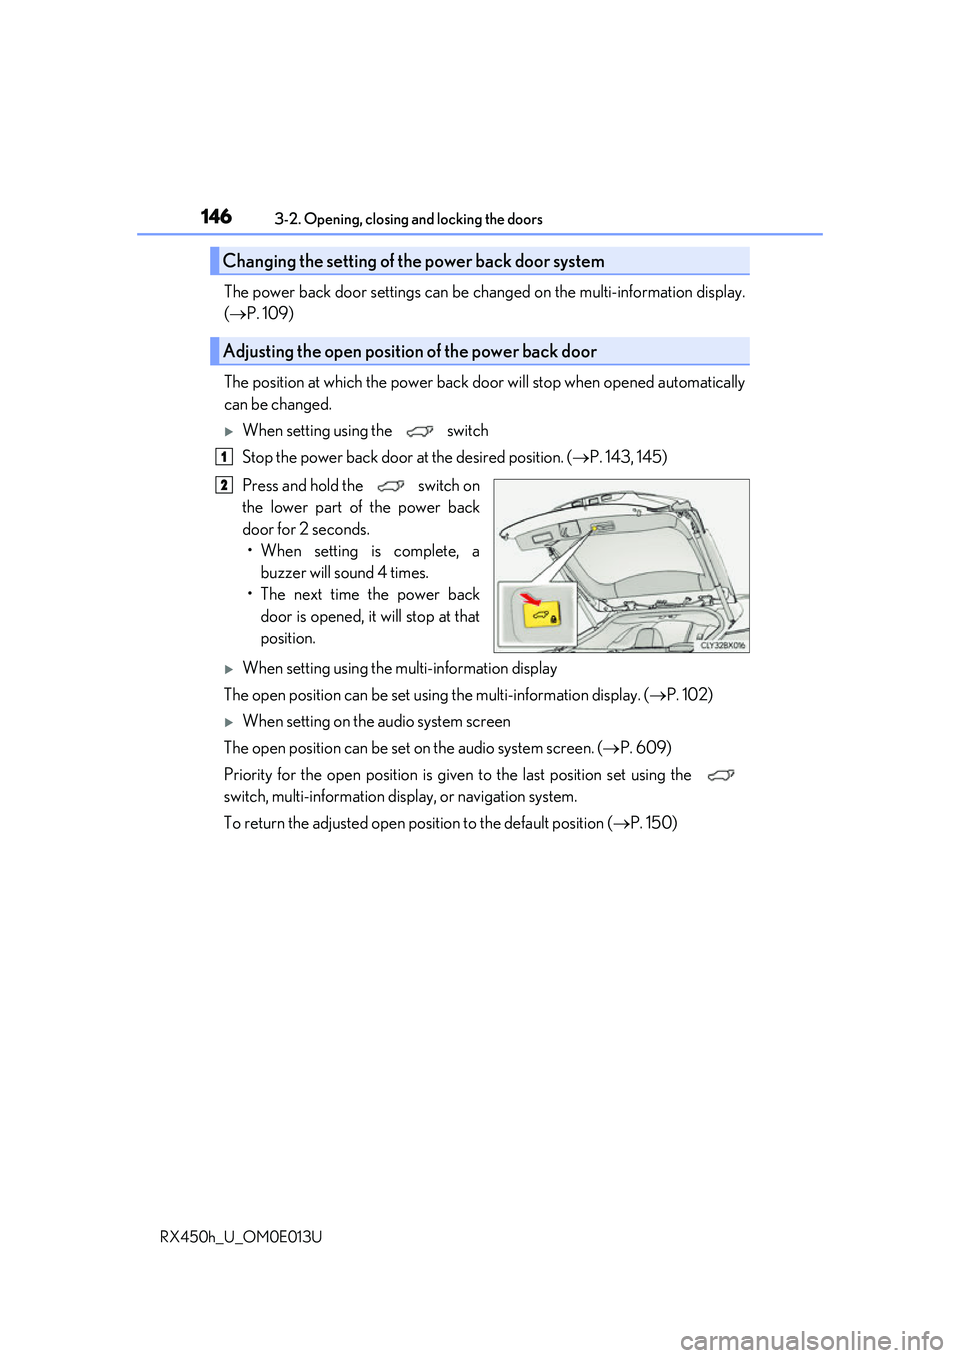 LEXUS RX450H 2016  Owners Manual 1463-2. Opening, closing and locking the doors
RX450h_U_OM0E013U
The power back door settings can be ch anged on the multi-information display.
( P. 109)
The position at which the power back door w